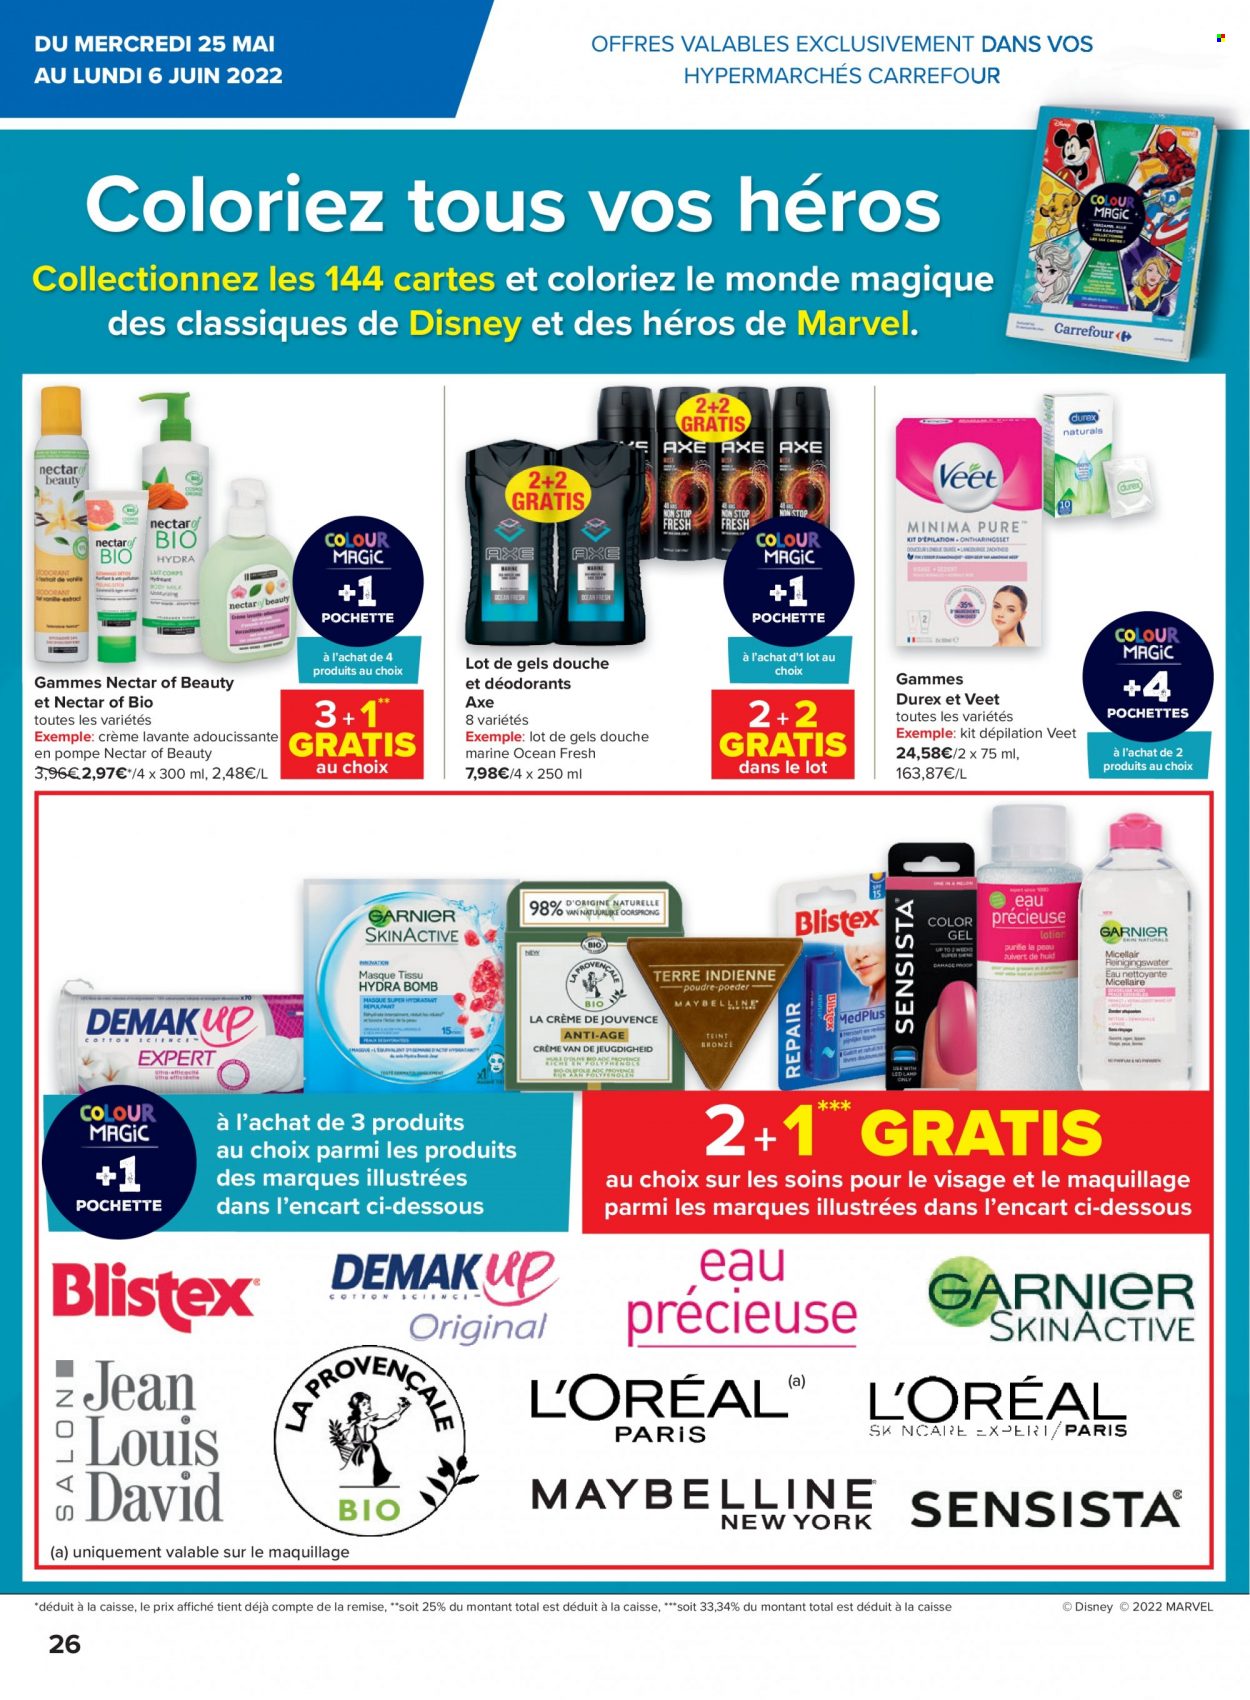 Catalogue Carrefour hypermarkt - 25.5.2022 - 31.5.2022. Page 26.